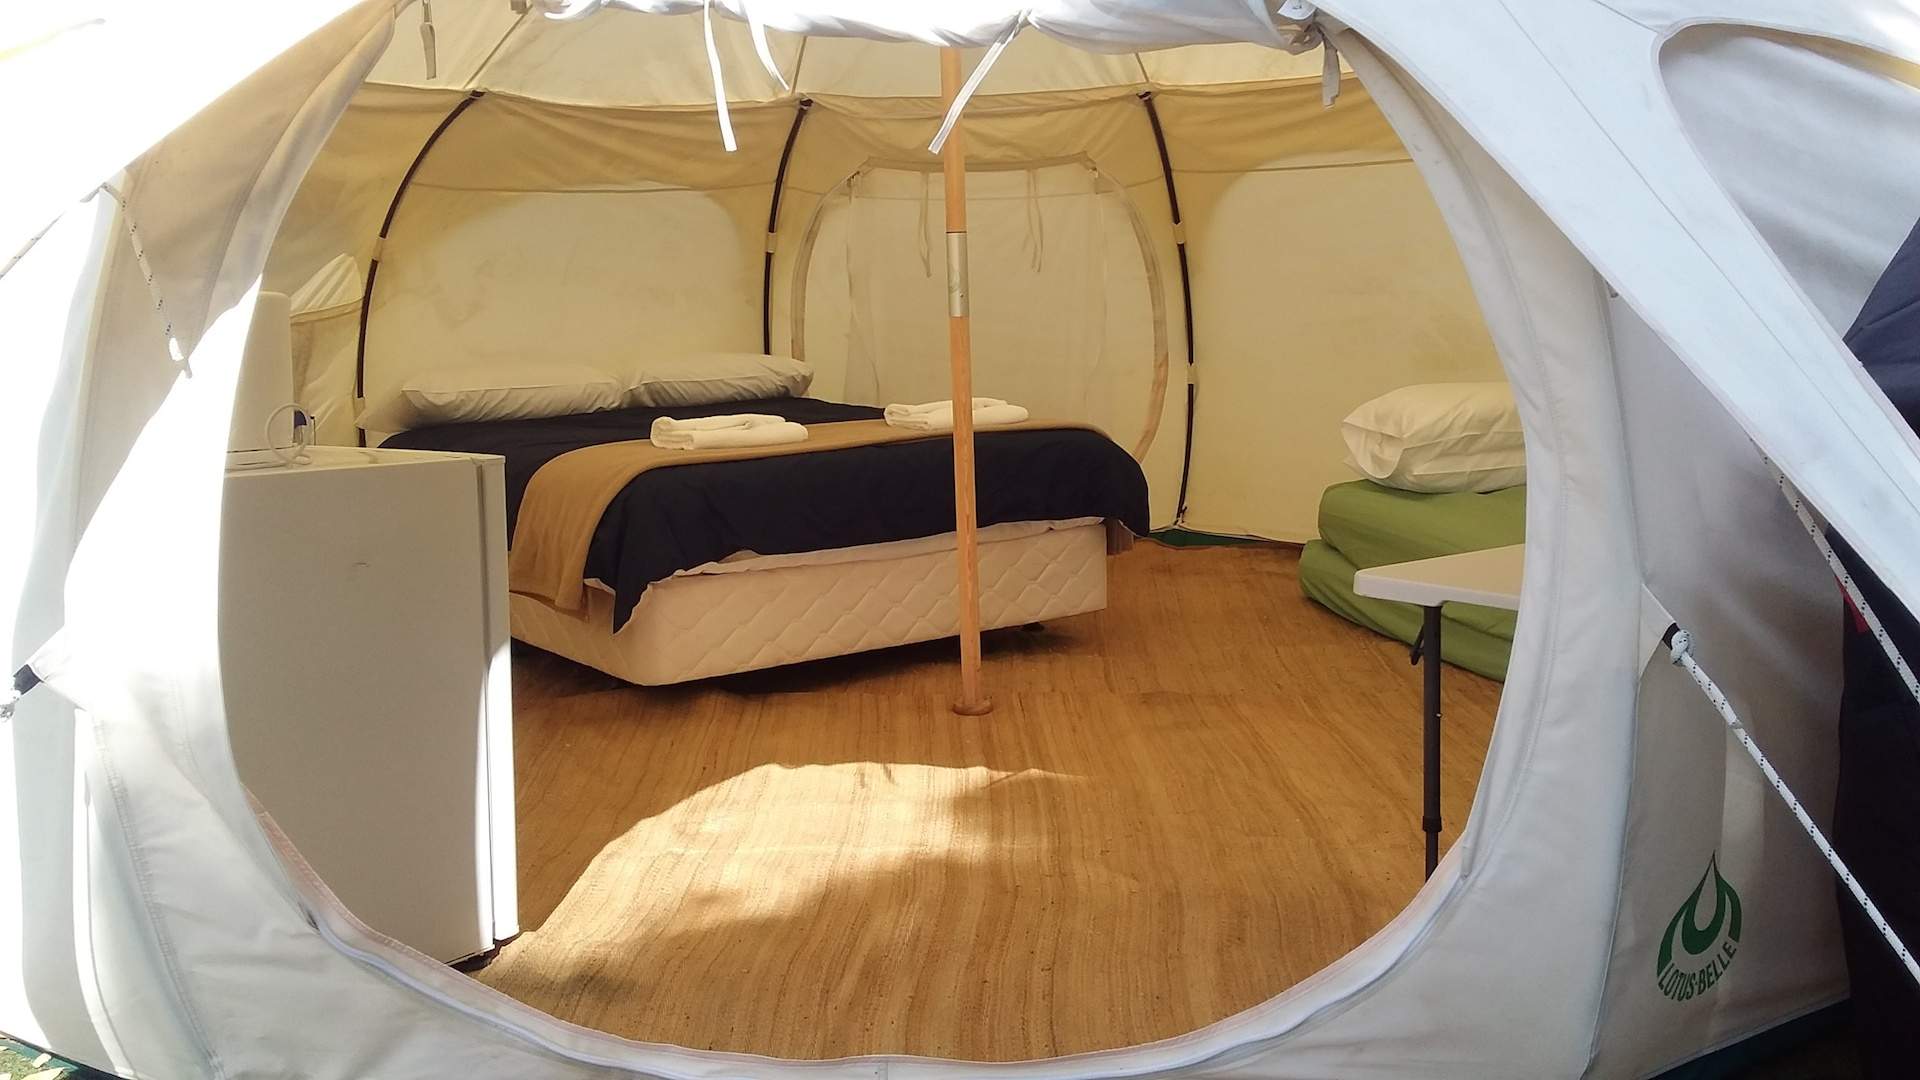 Auckland Council Has Launched Three Luxury Glamping Sites for Summer